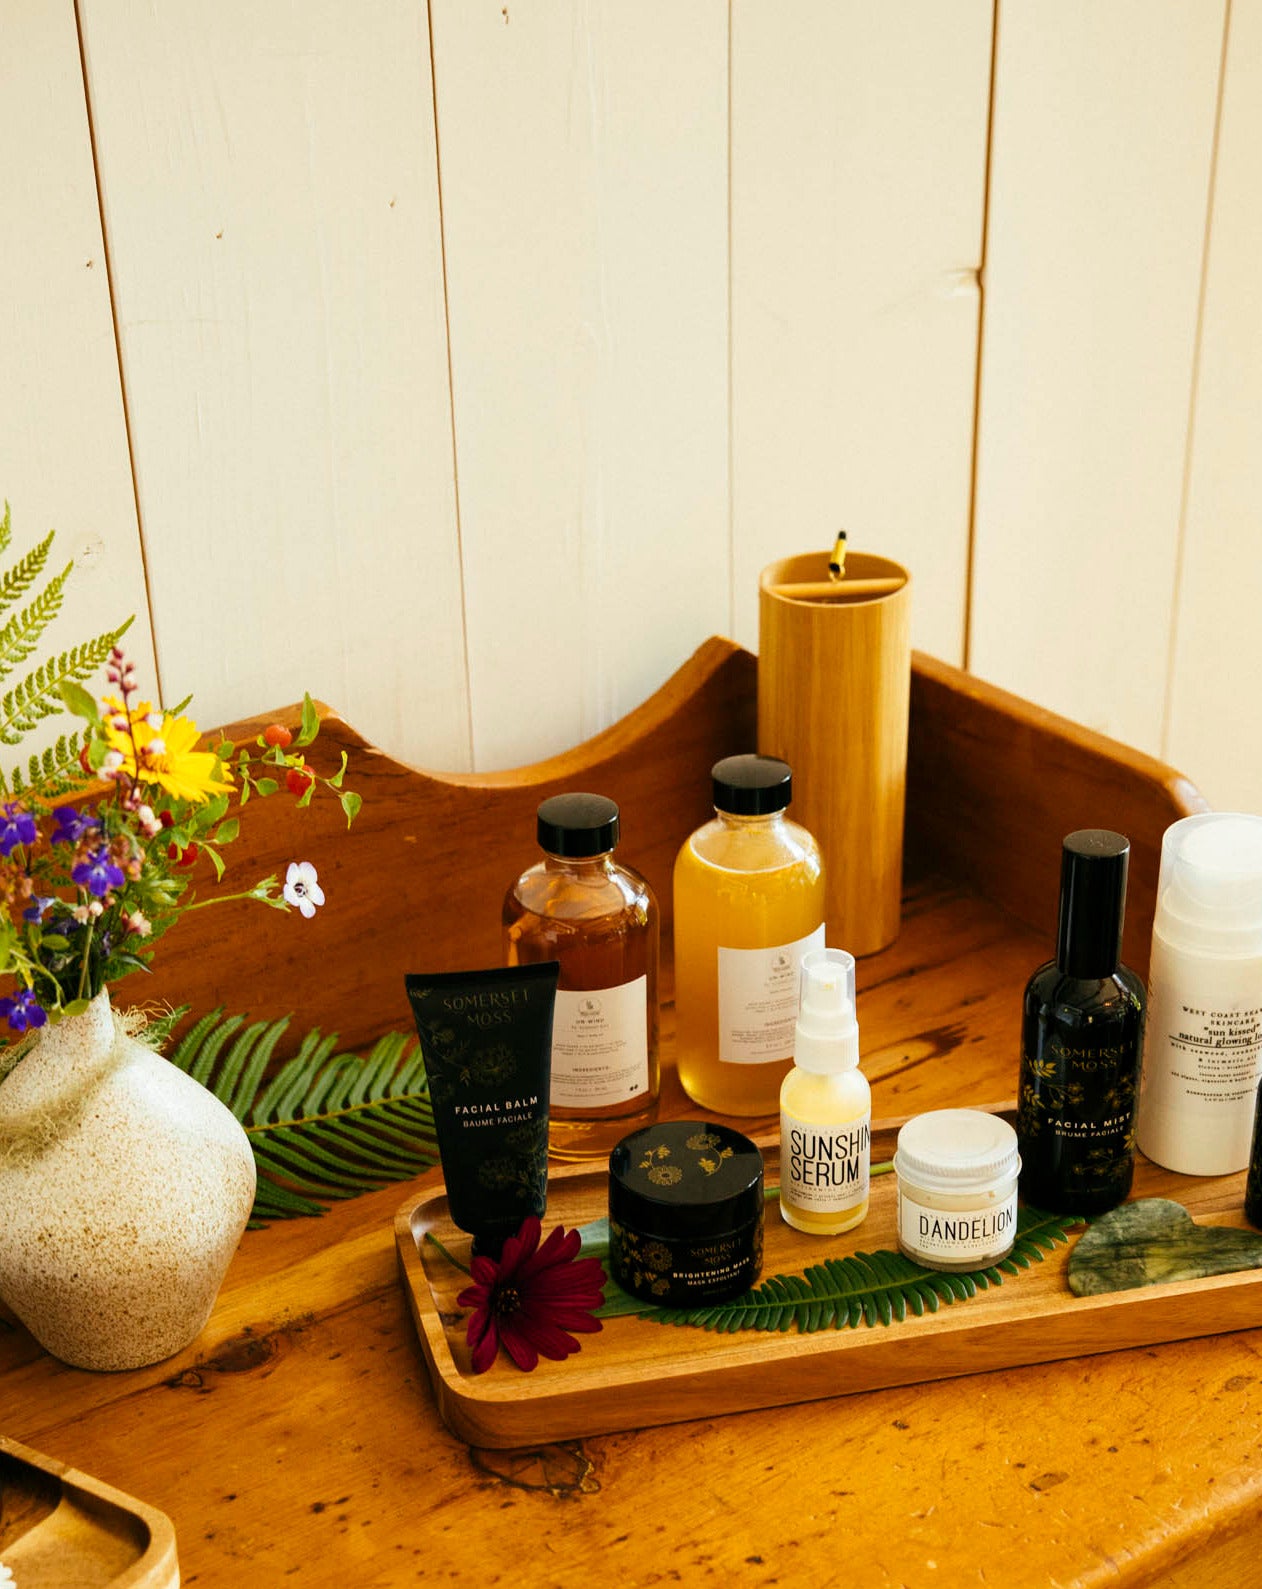 Facial setup with Sunshine serum from forest etiquette